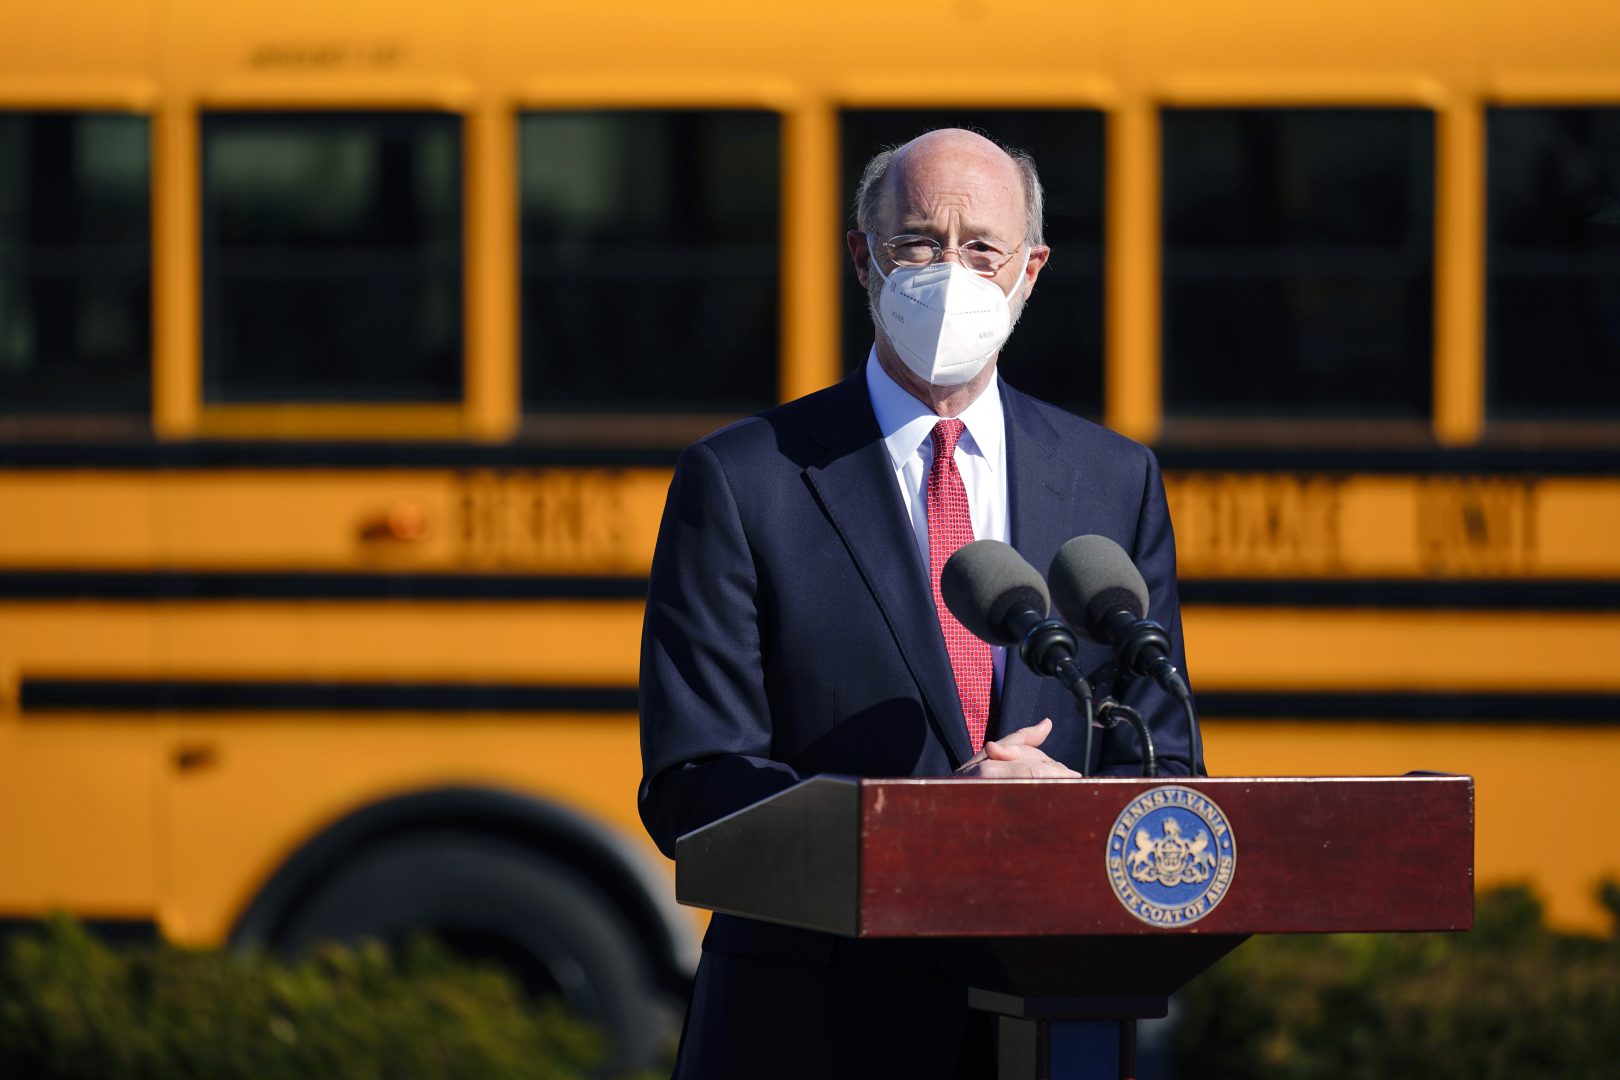 Gov. Tom Wolf speaks at a COVID-19 vaccination site setup at the Berks County Intermediate Unit in Reading, Pa., on March 15, 2021.